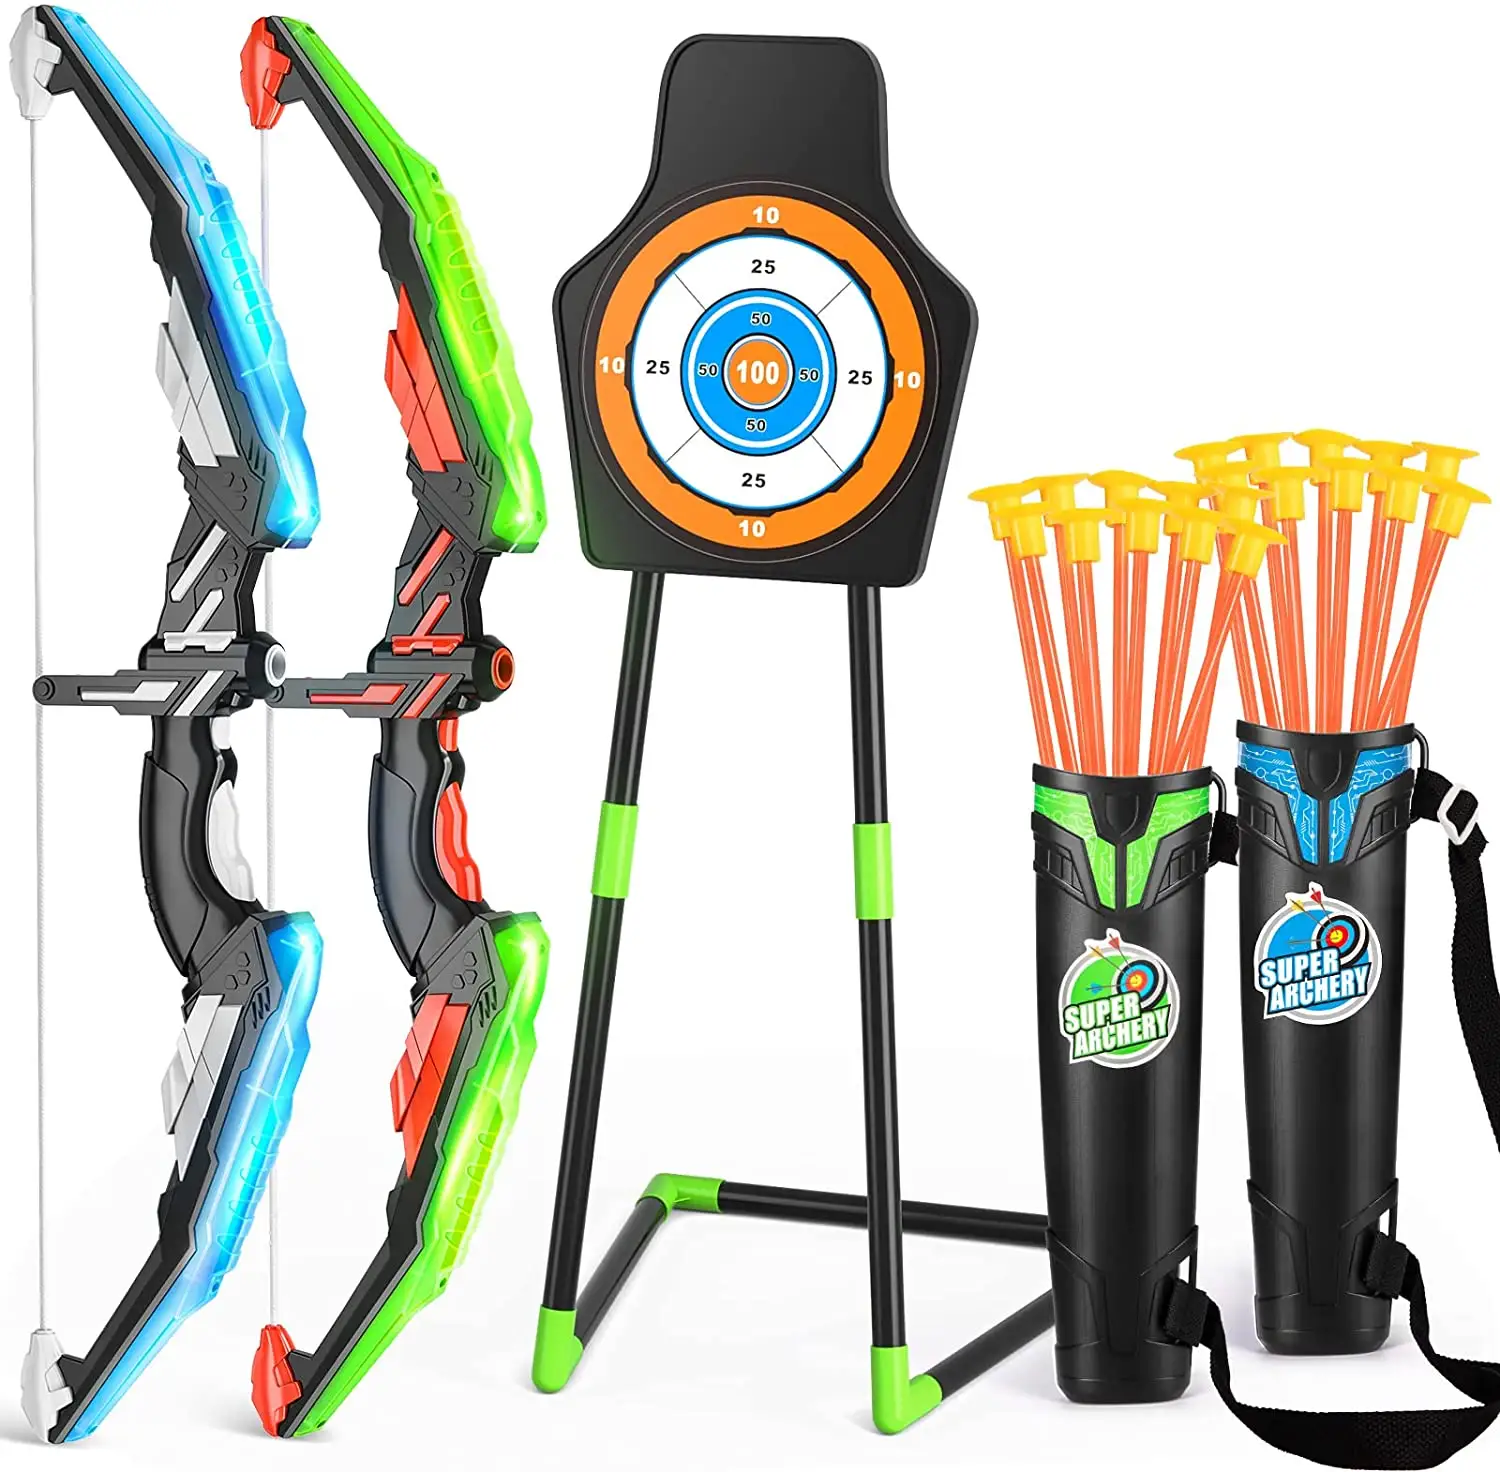 Amazon best seller Bow and arrow shooting game plastic toy for boy outdoor kids interactive other toys